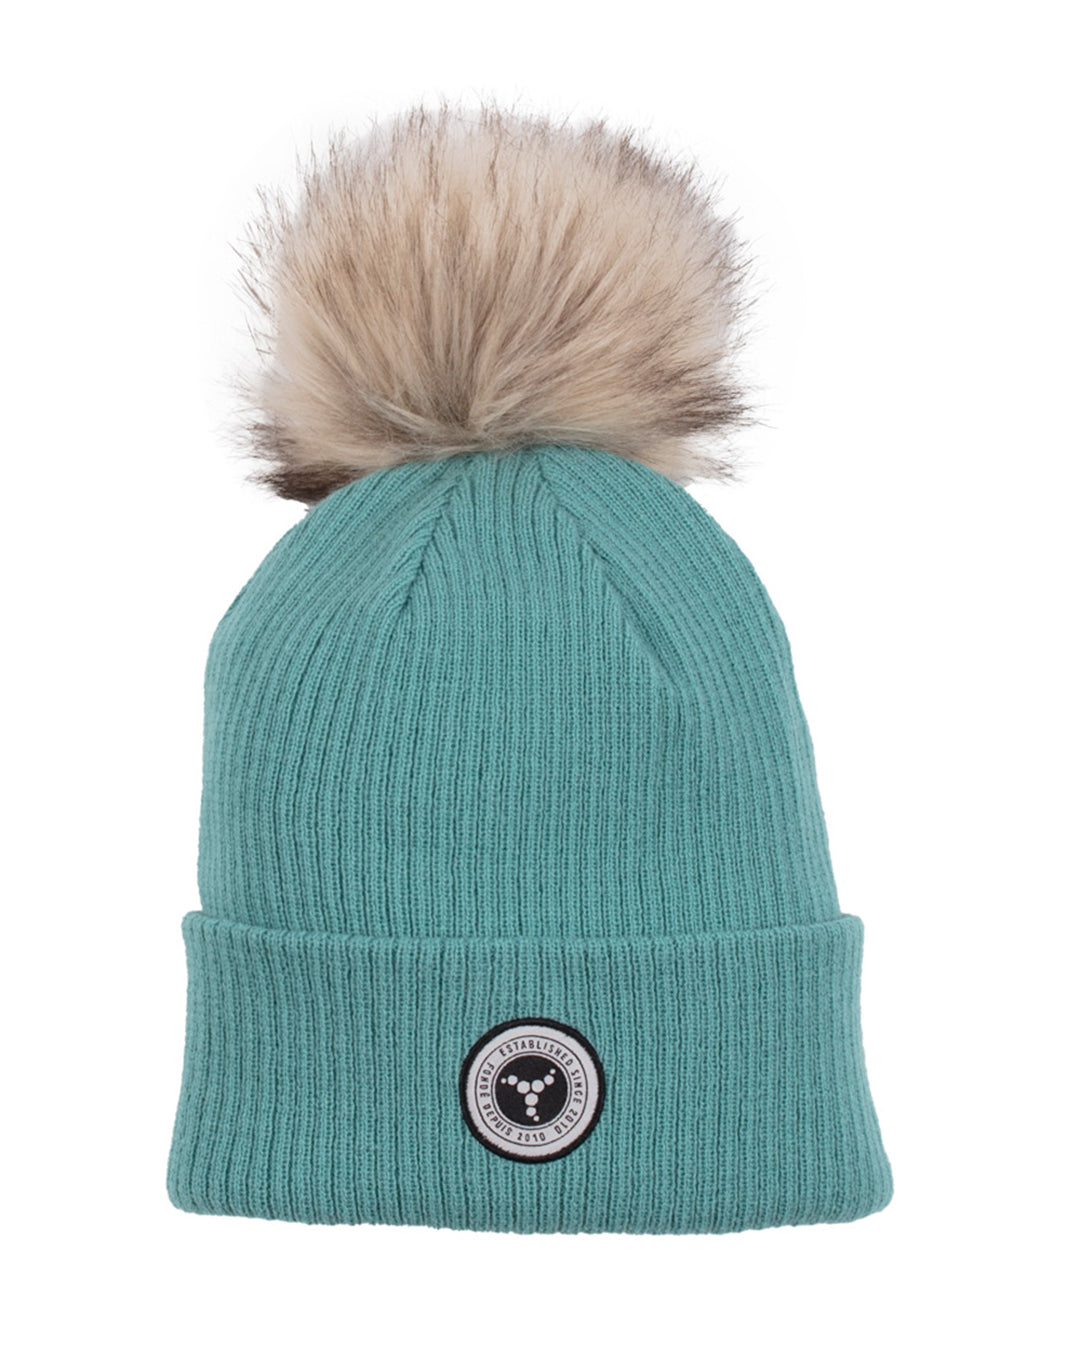 *** New Knit teen Hat Turquoise